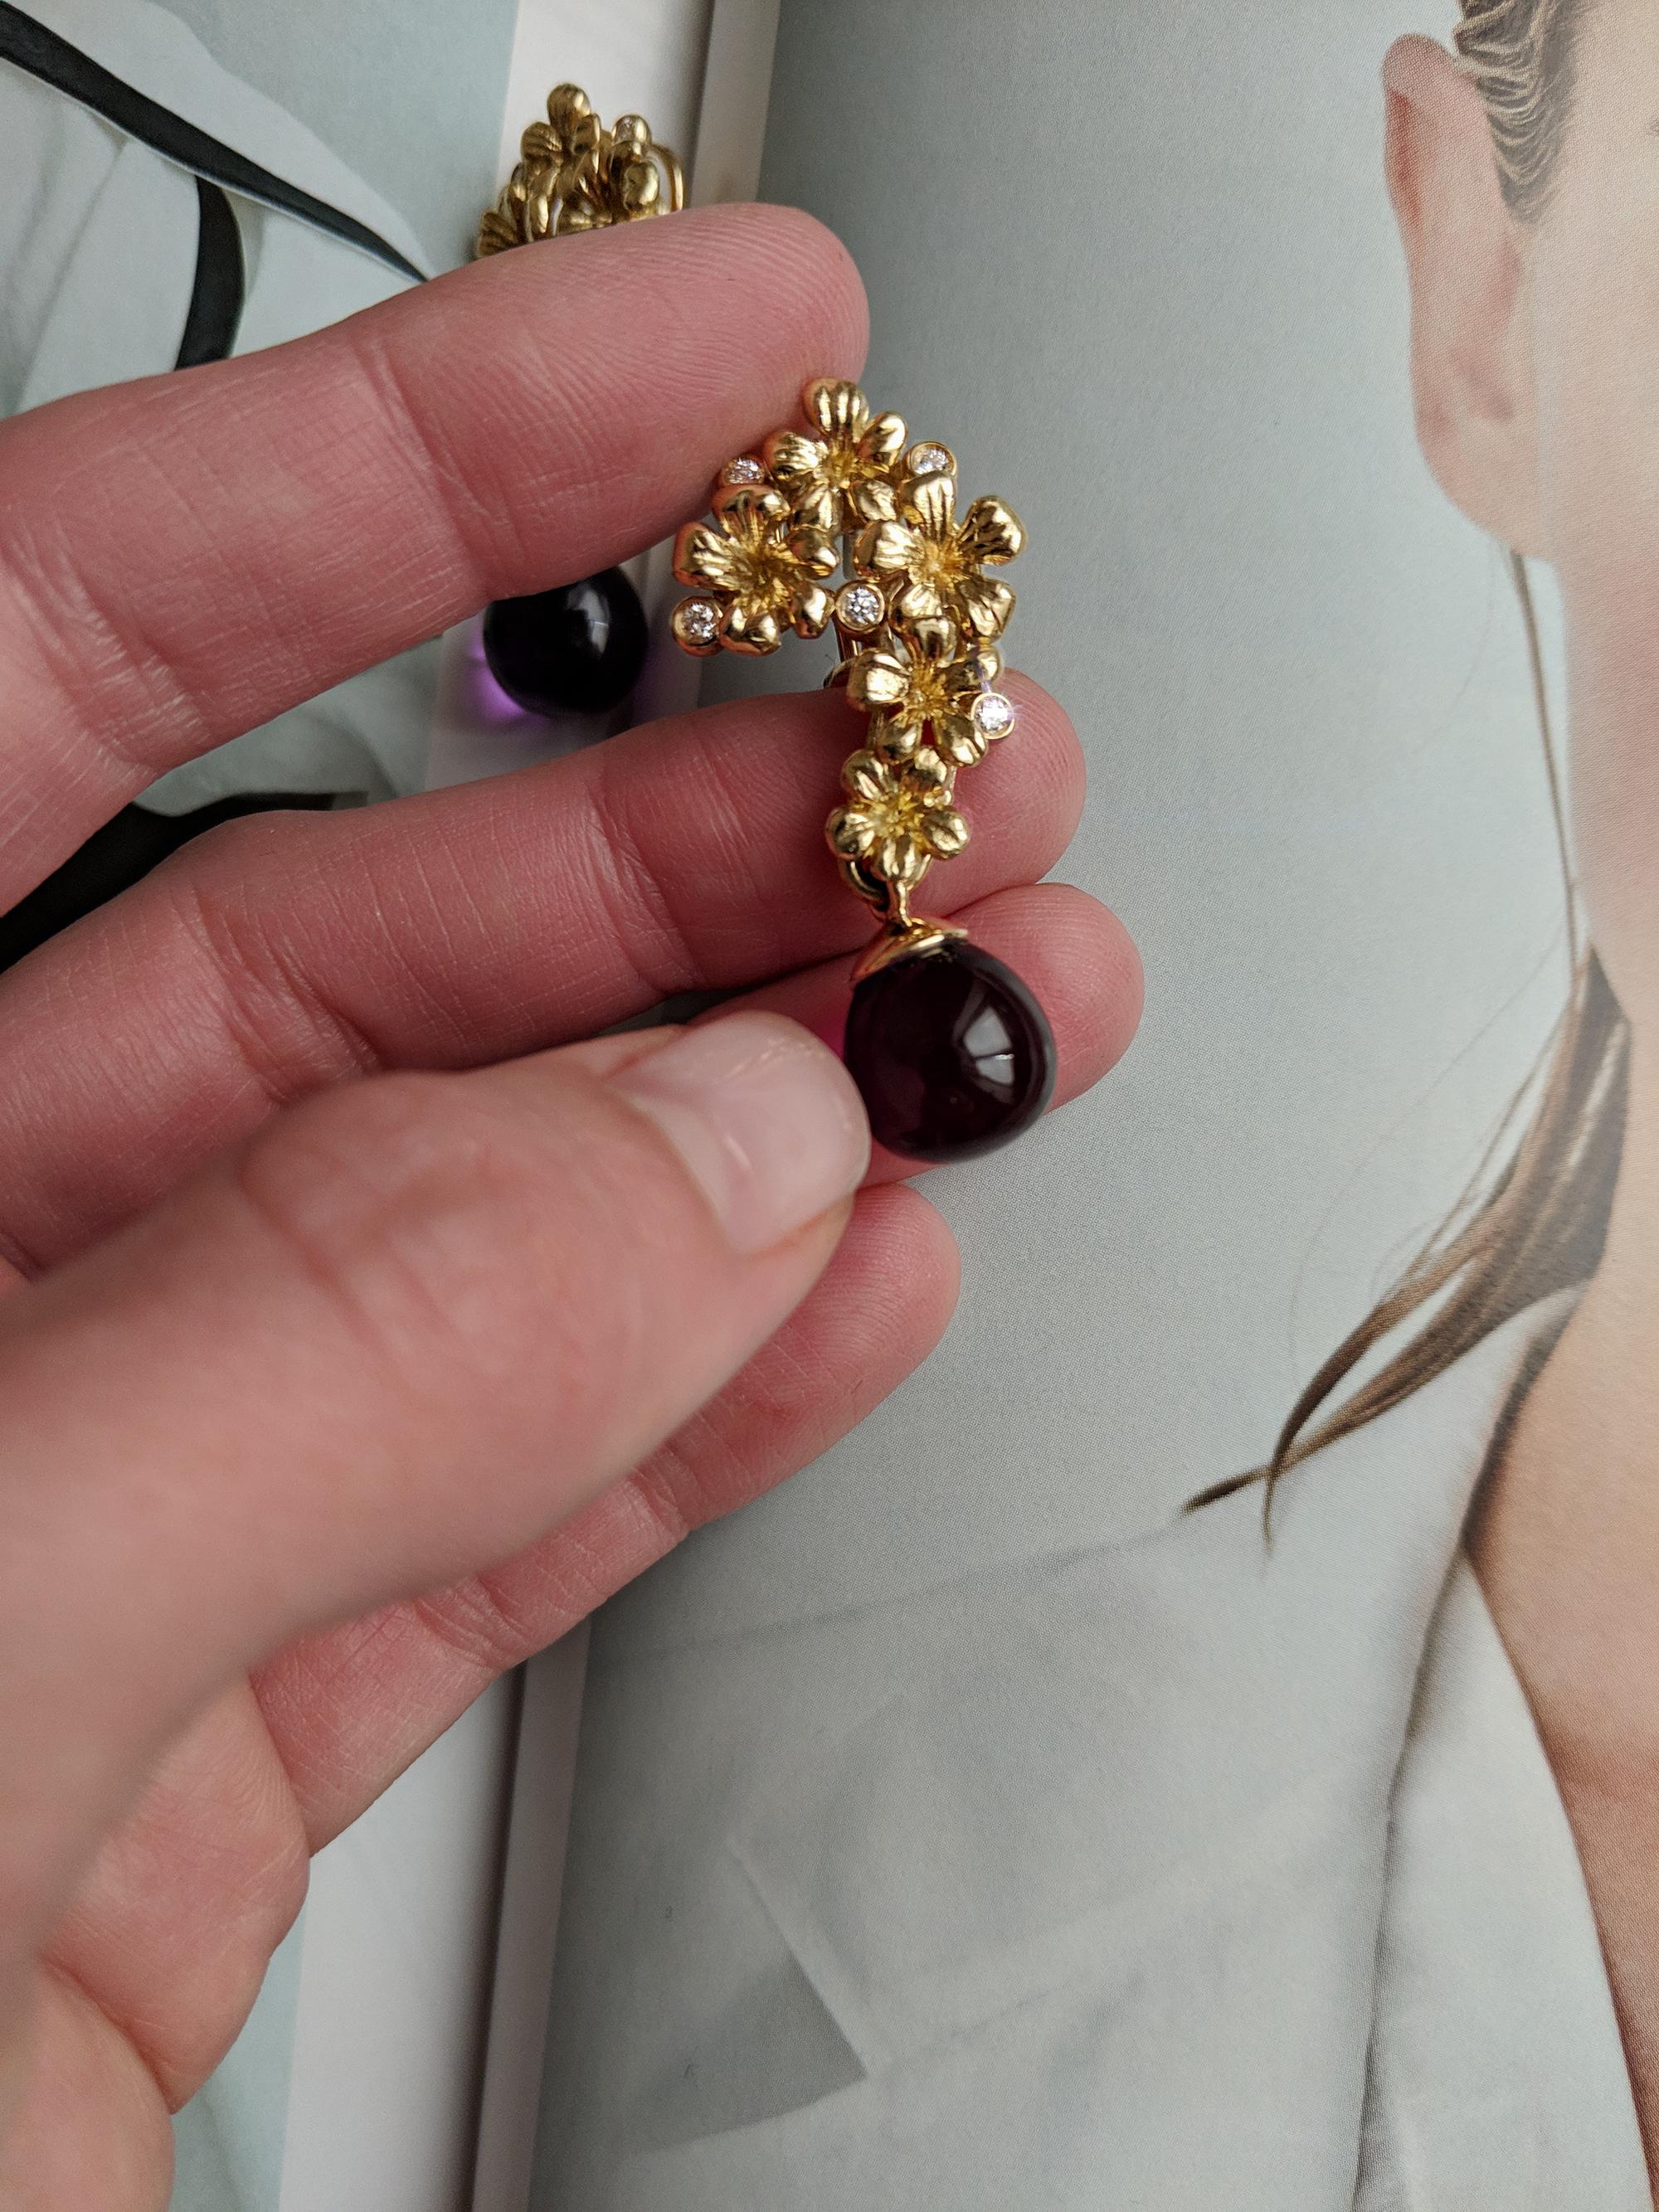 These Plum Blossom clip-on earrings have removable cabochon amethyst drops and are encrusted with ten round diamonds. They are made of 18 karat yellow gold and belong to a collection featured in a Vogue UA review that was influenced by modern floral